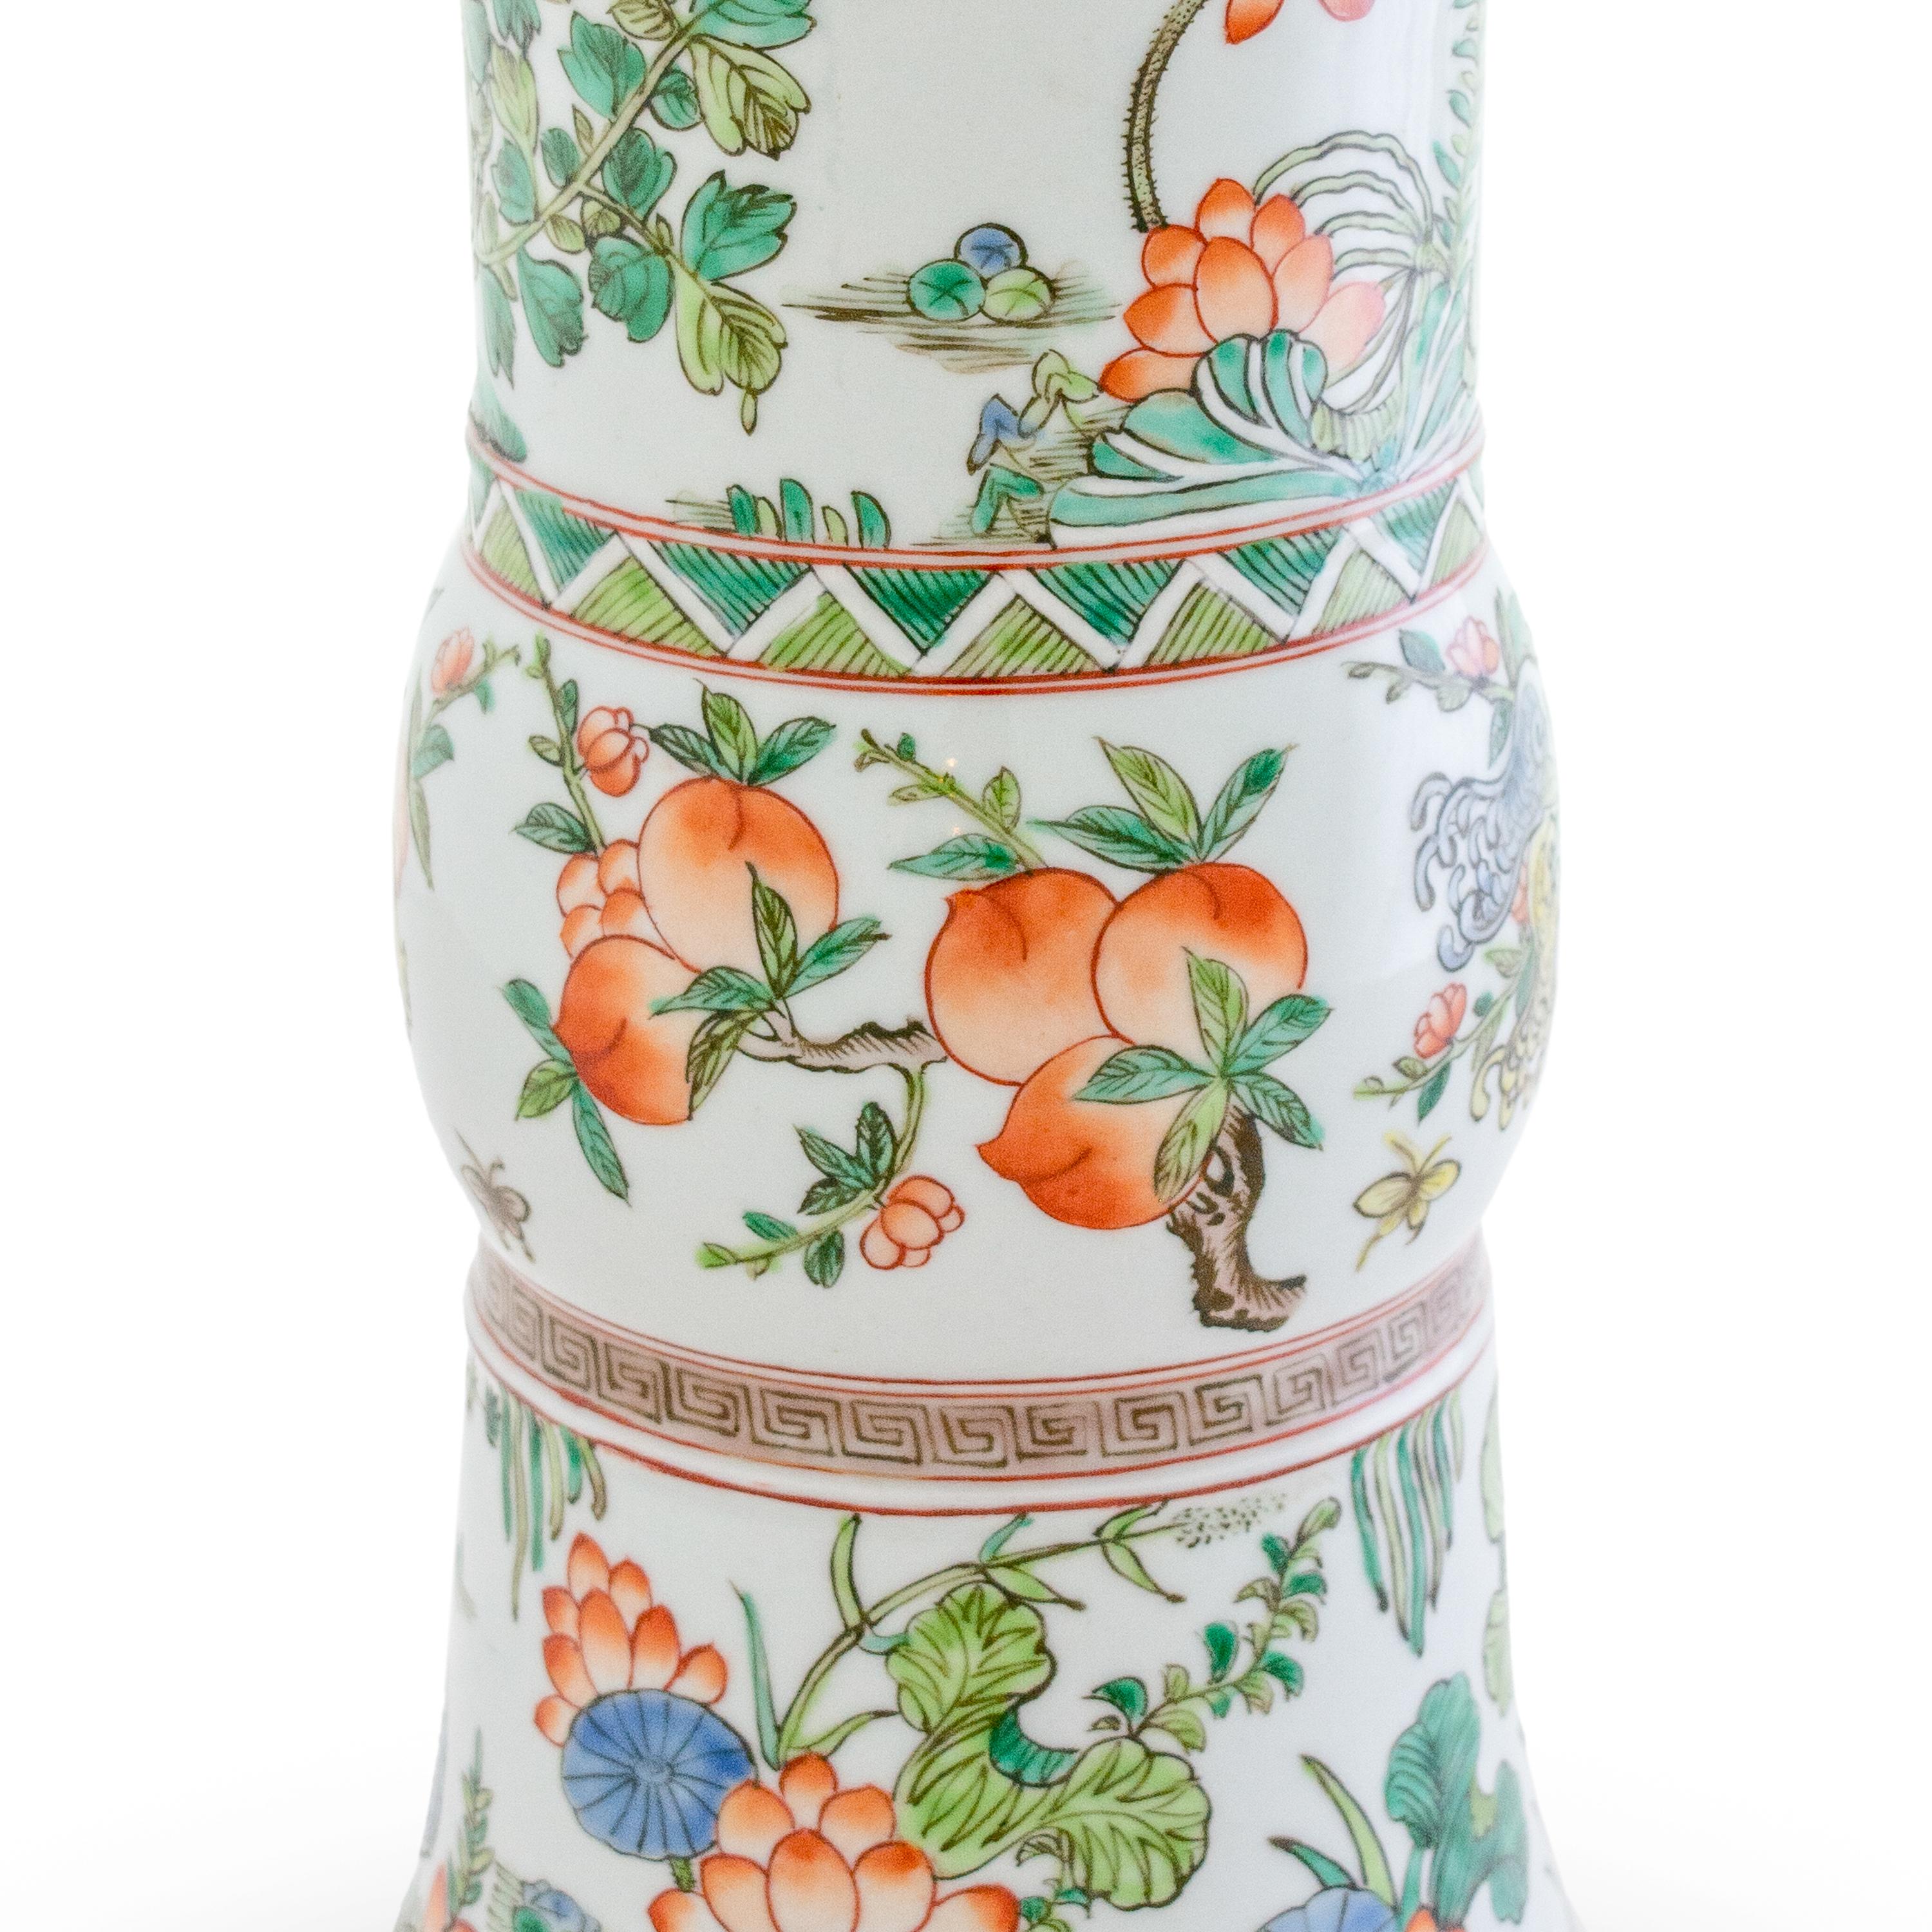 This is a beautiful pair of Chinese trumpet vases, hand-painted in a delicate pallet, depicting colorful birds, flowers and foliage.